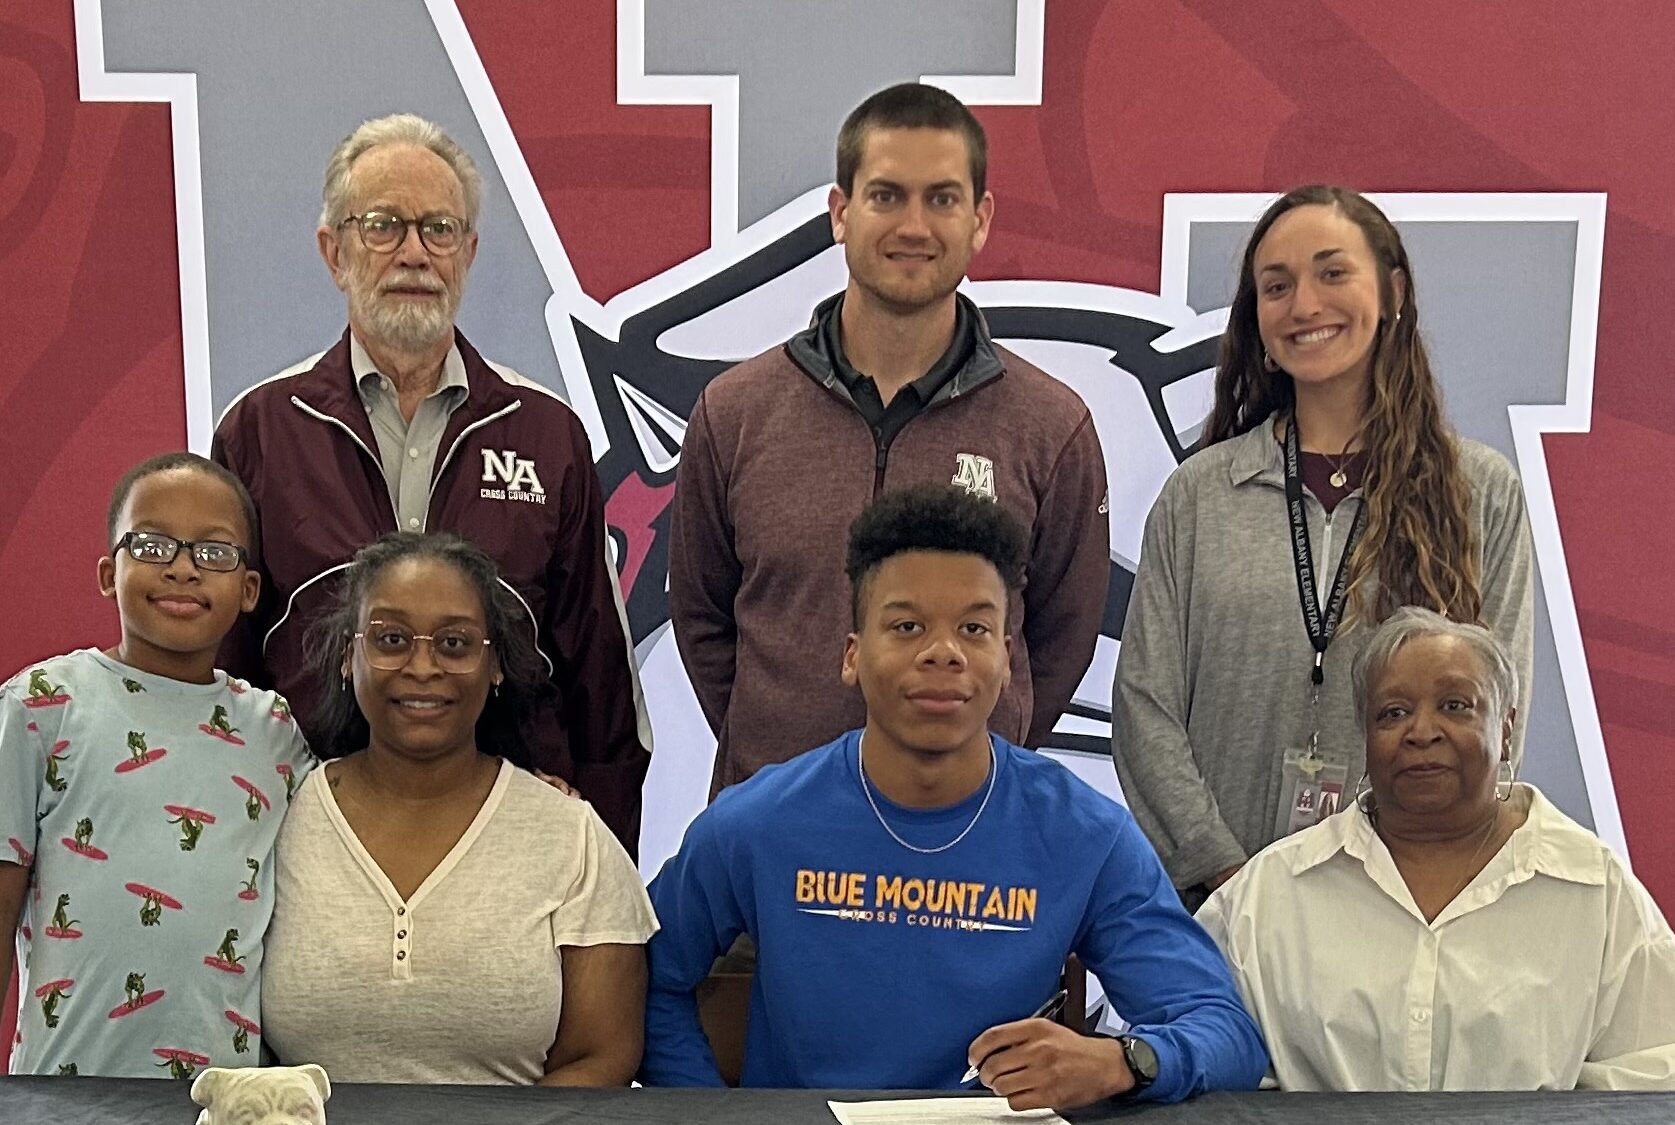 New Albany Bulldog Runner Lelan Boulden signed to run cross country for Blue Mountain Christian University on Friday, March 10. Pictured are front row l-r: Dillen Cook, Karen Jumper, Lelan Boulden, Glenda Wilson; back row l-r: Assistant Cross Country Coach Mike Beam, Head Cross Country Coach Austin Epting, Assistant Cross Country Cross Hannah Covington.